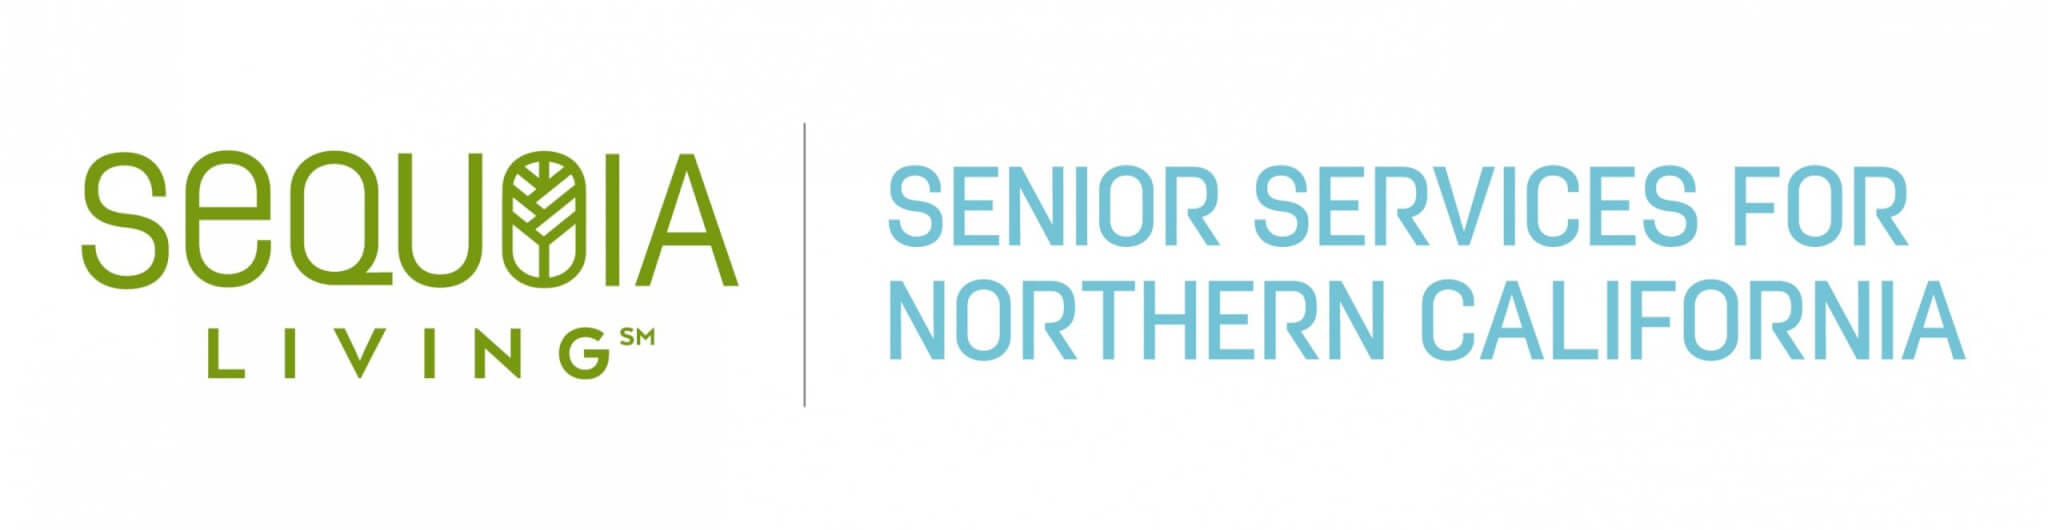 Sequoia Living. Senior Services for Northern California